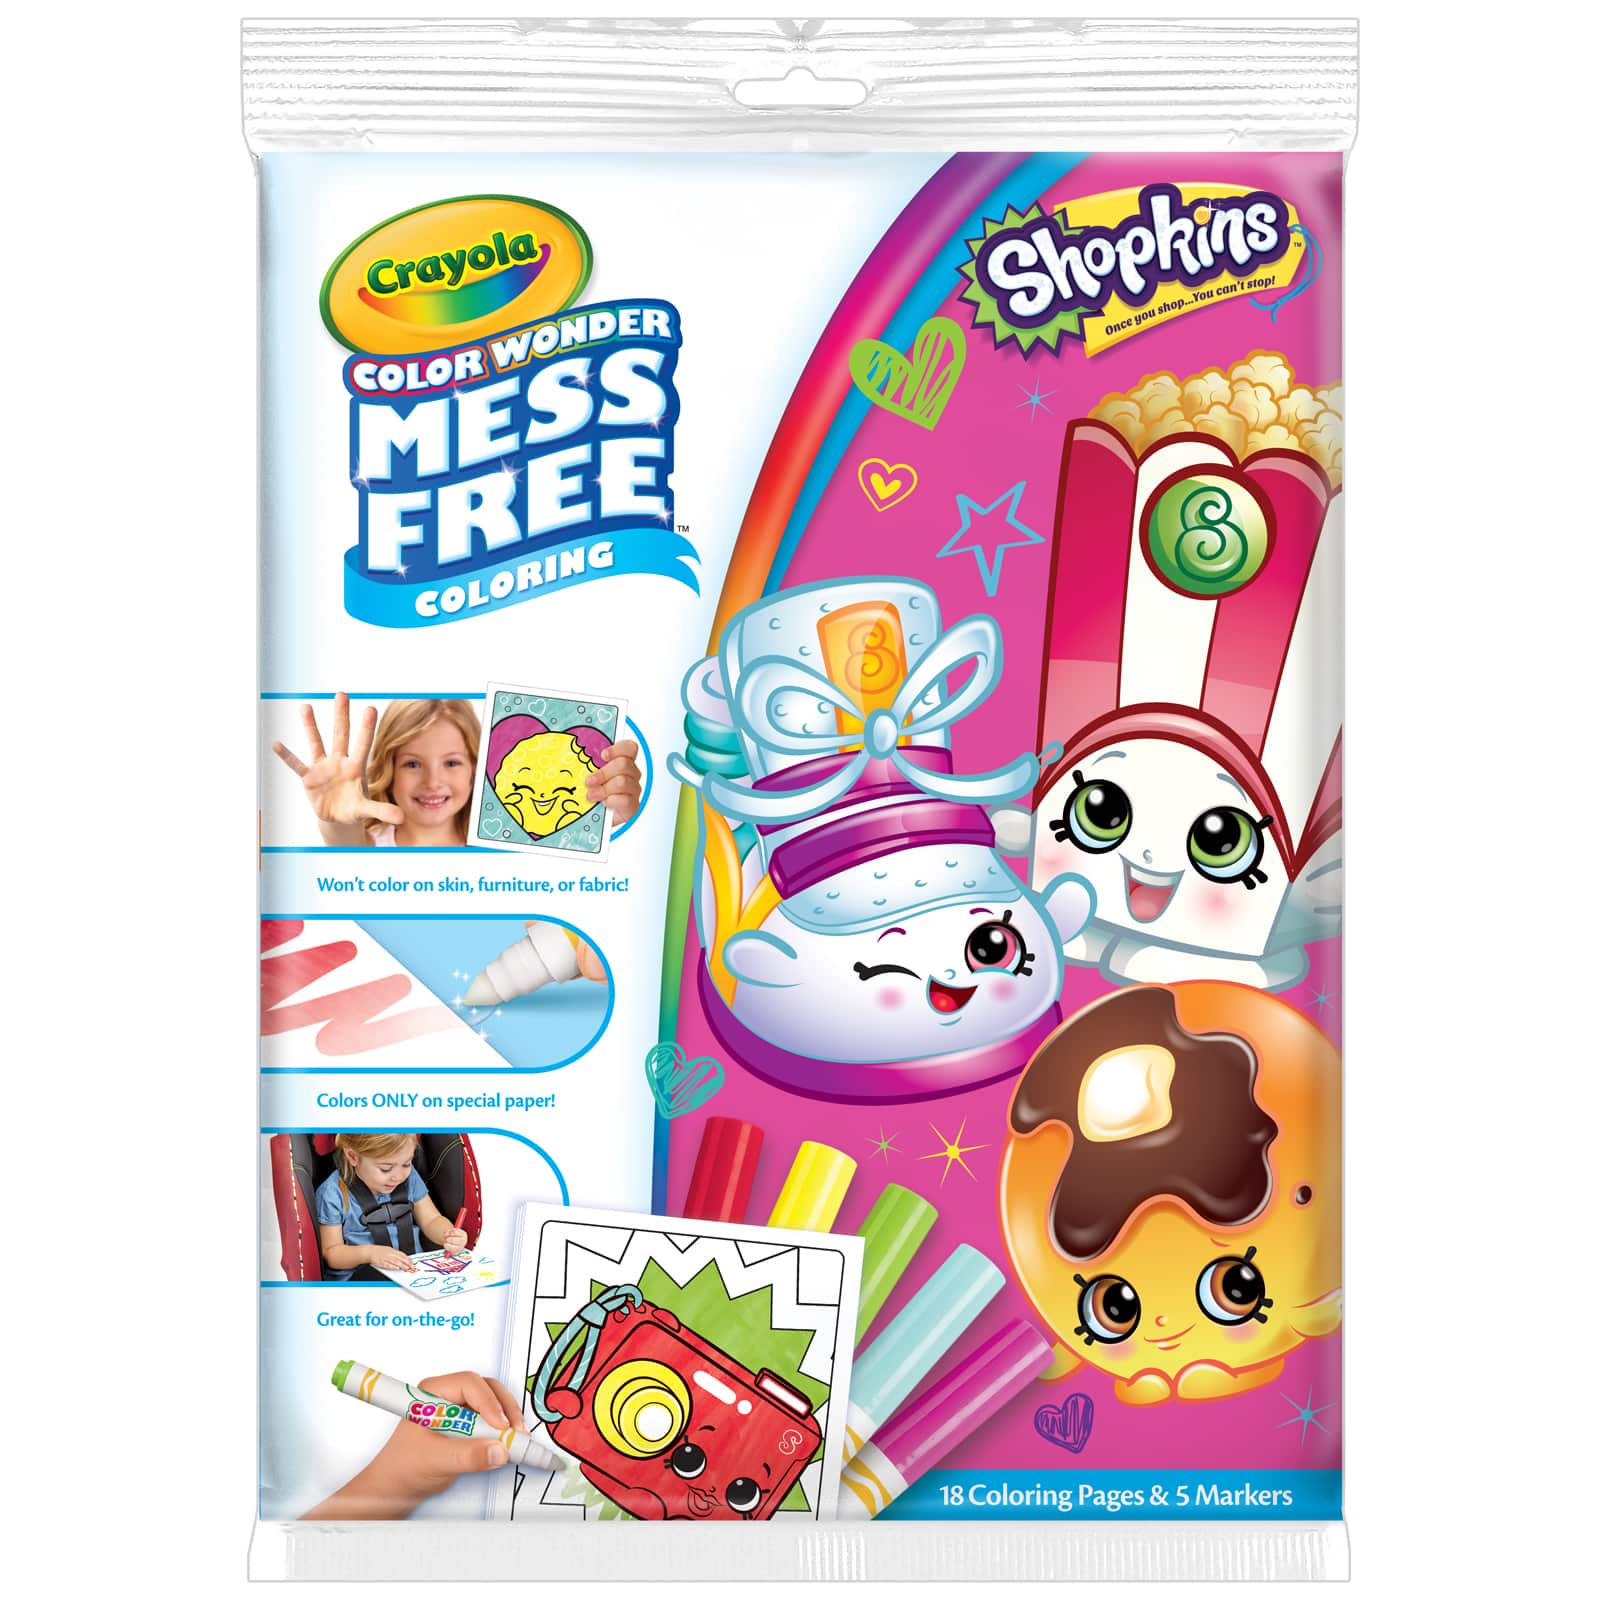 Shop For The Crayola Color Wonder Mess Free Coloring Pad Markers Shopkins At Michaels